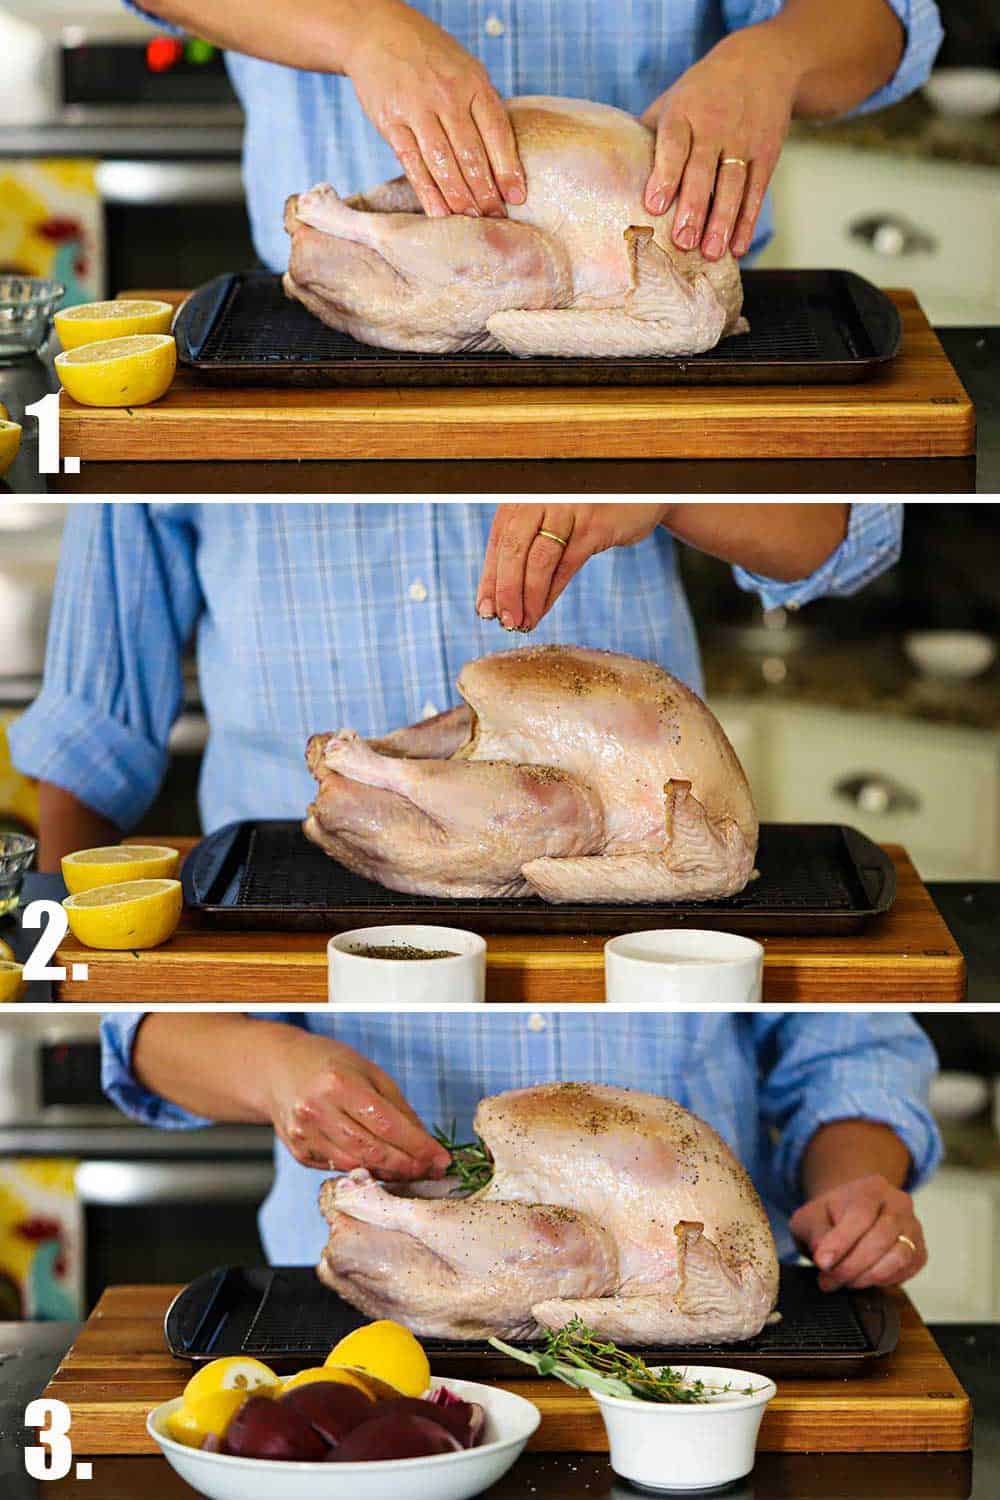 A person rubbing oil over a fresh turkey and then sprinkling salt, and then placing herbs in the cavity of the bird.